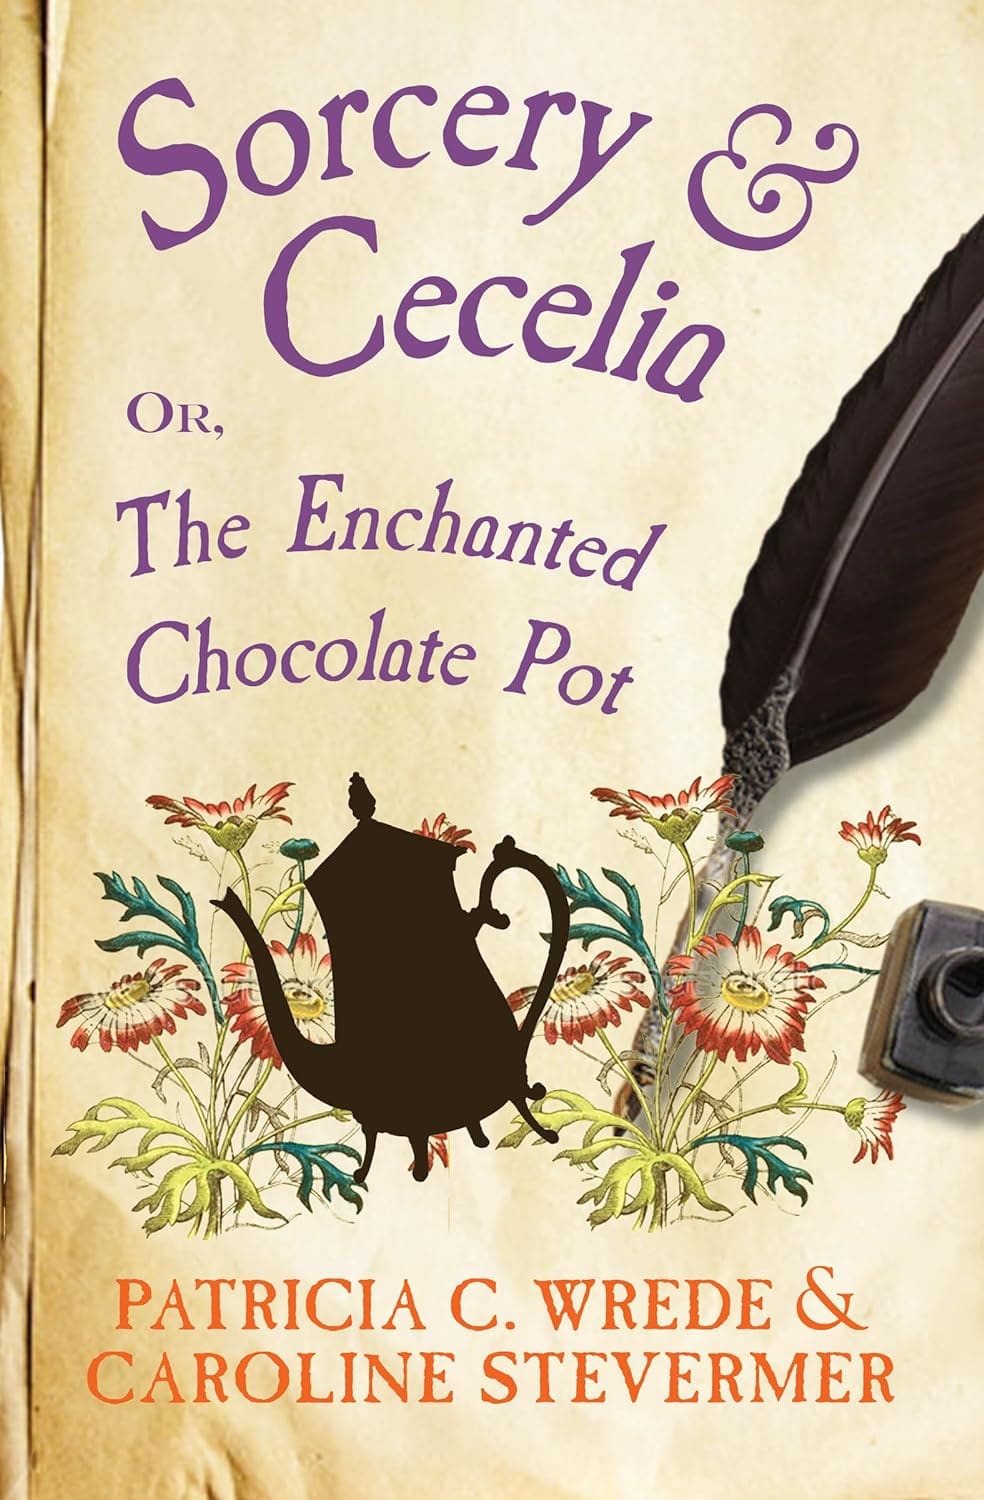 Sorcery & Cecelia: or The Enchanted Chocolate Pot by Patricia C. Wrede and Caroline Stevermer